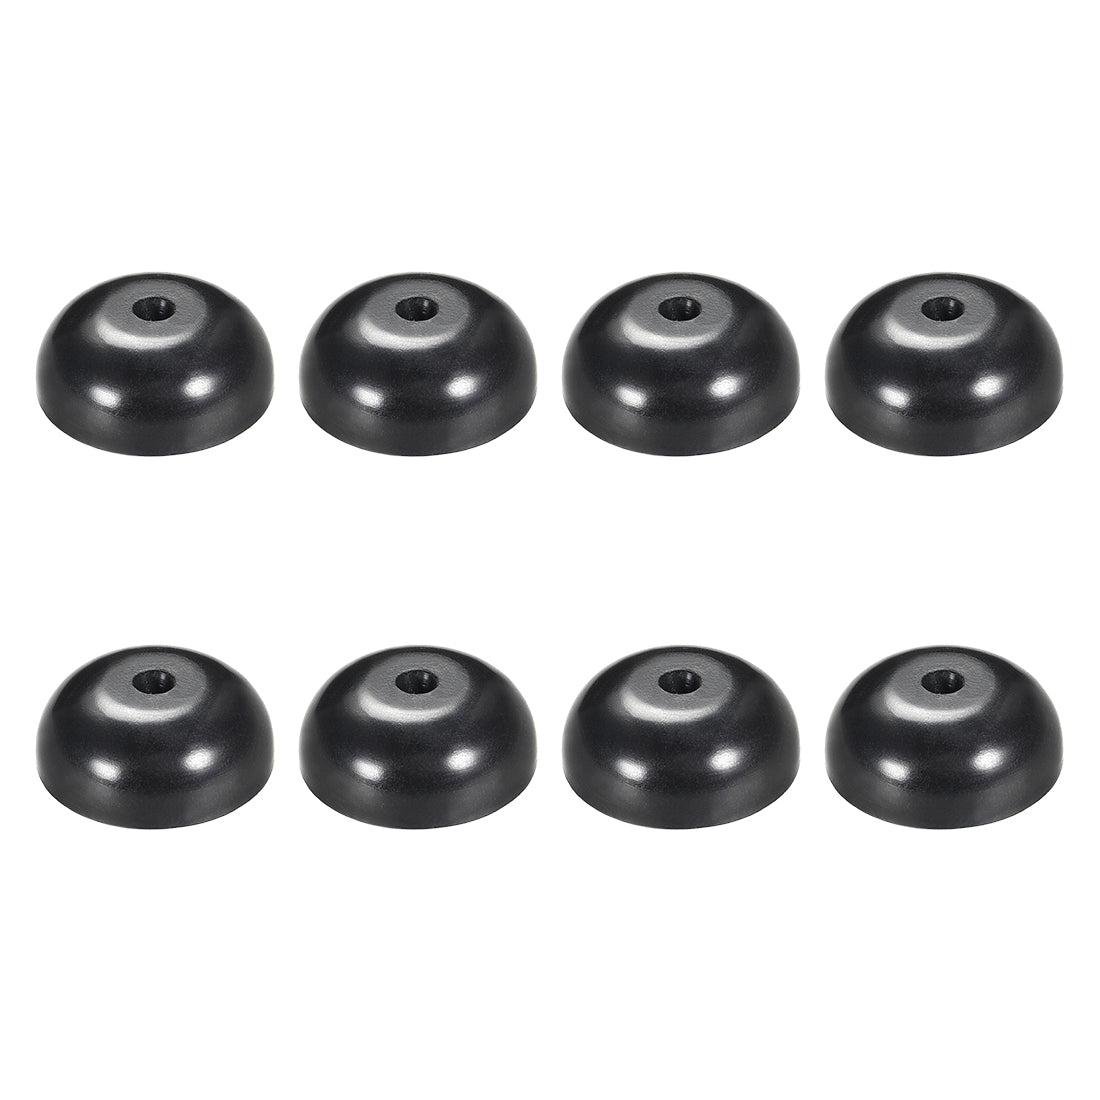 uxcell Uxcell 8Pcs D25xH10mm Rubber Feet Anti-Vibration Base Pad Stand for Speaker Guitar Amplifier HiFi